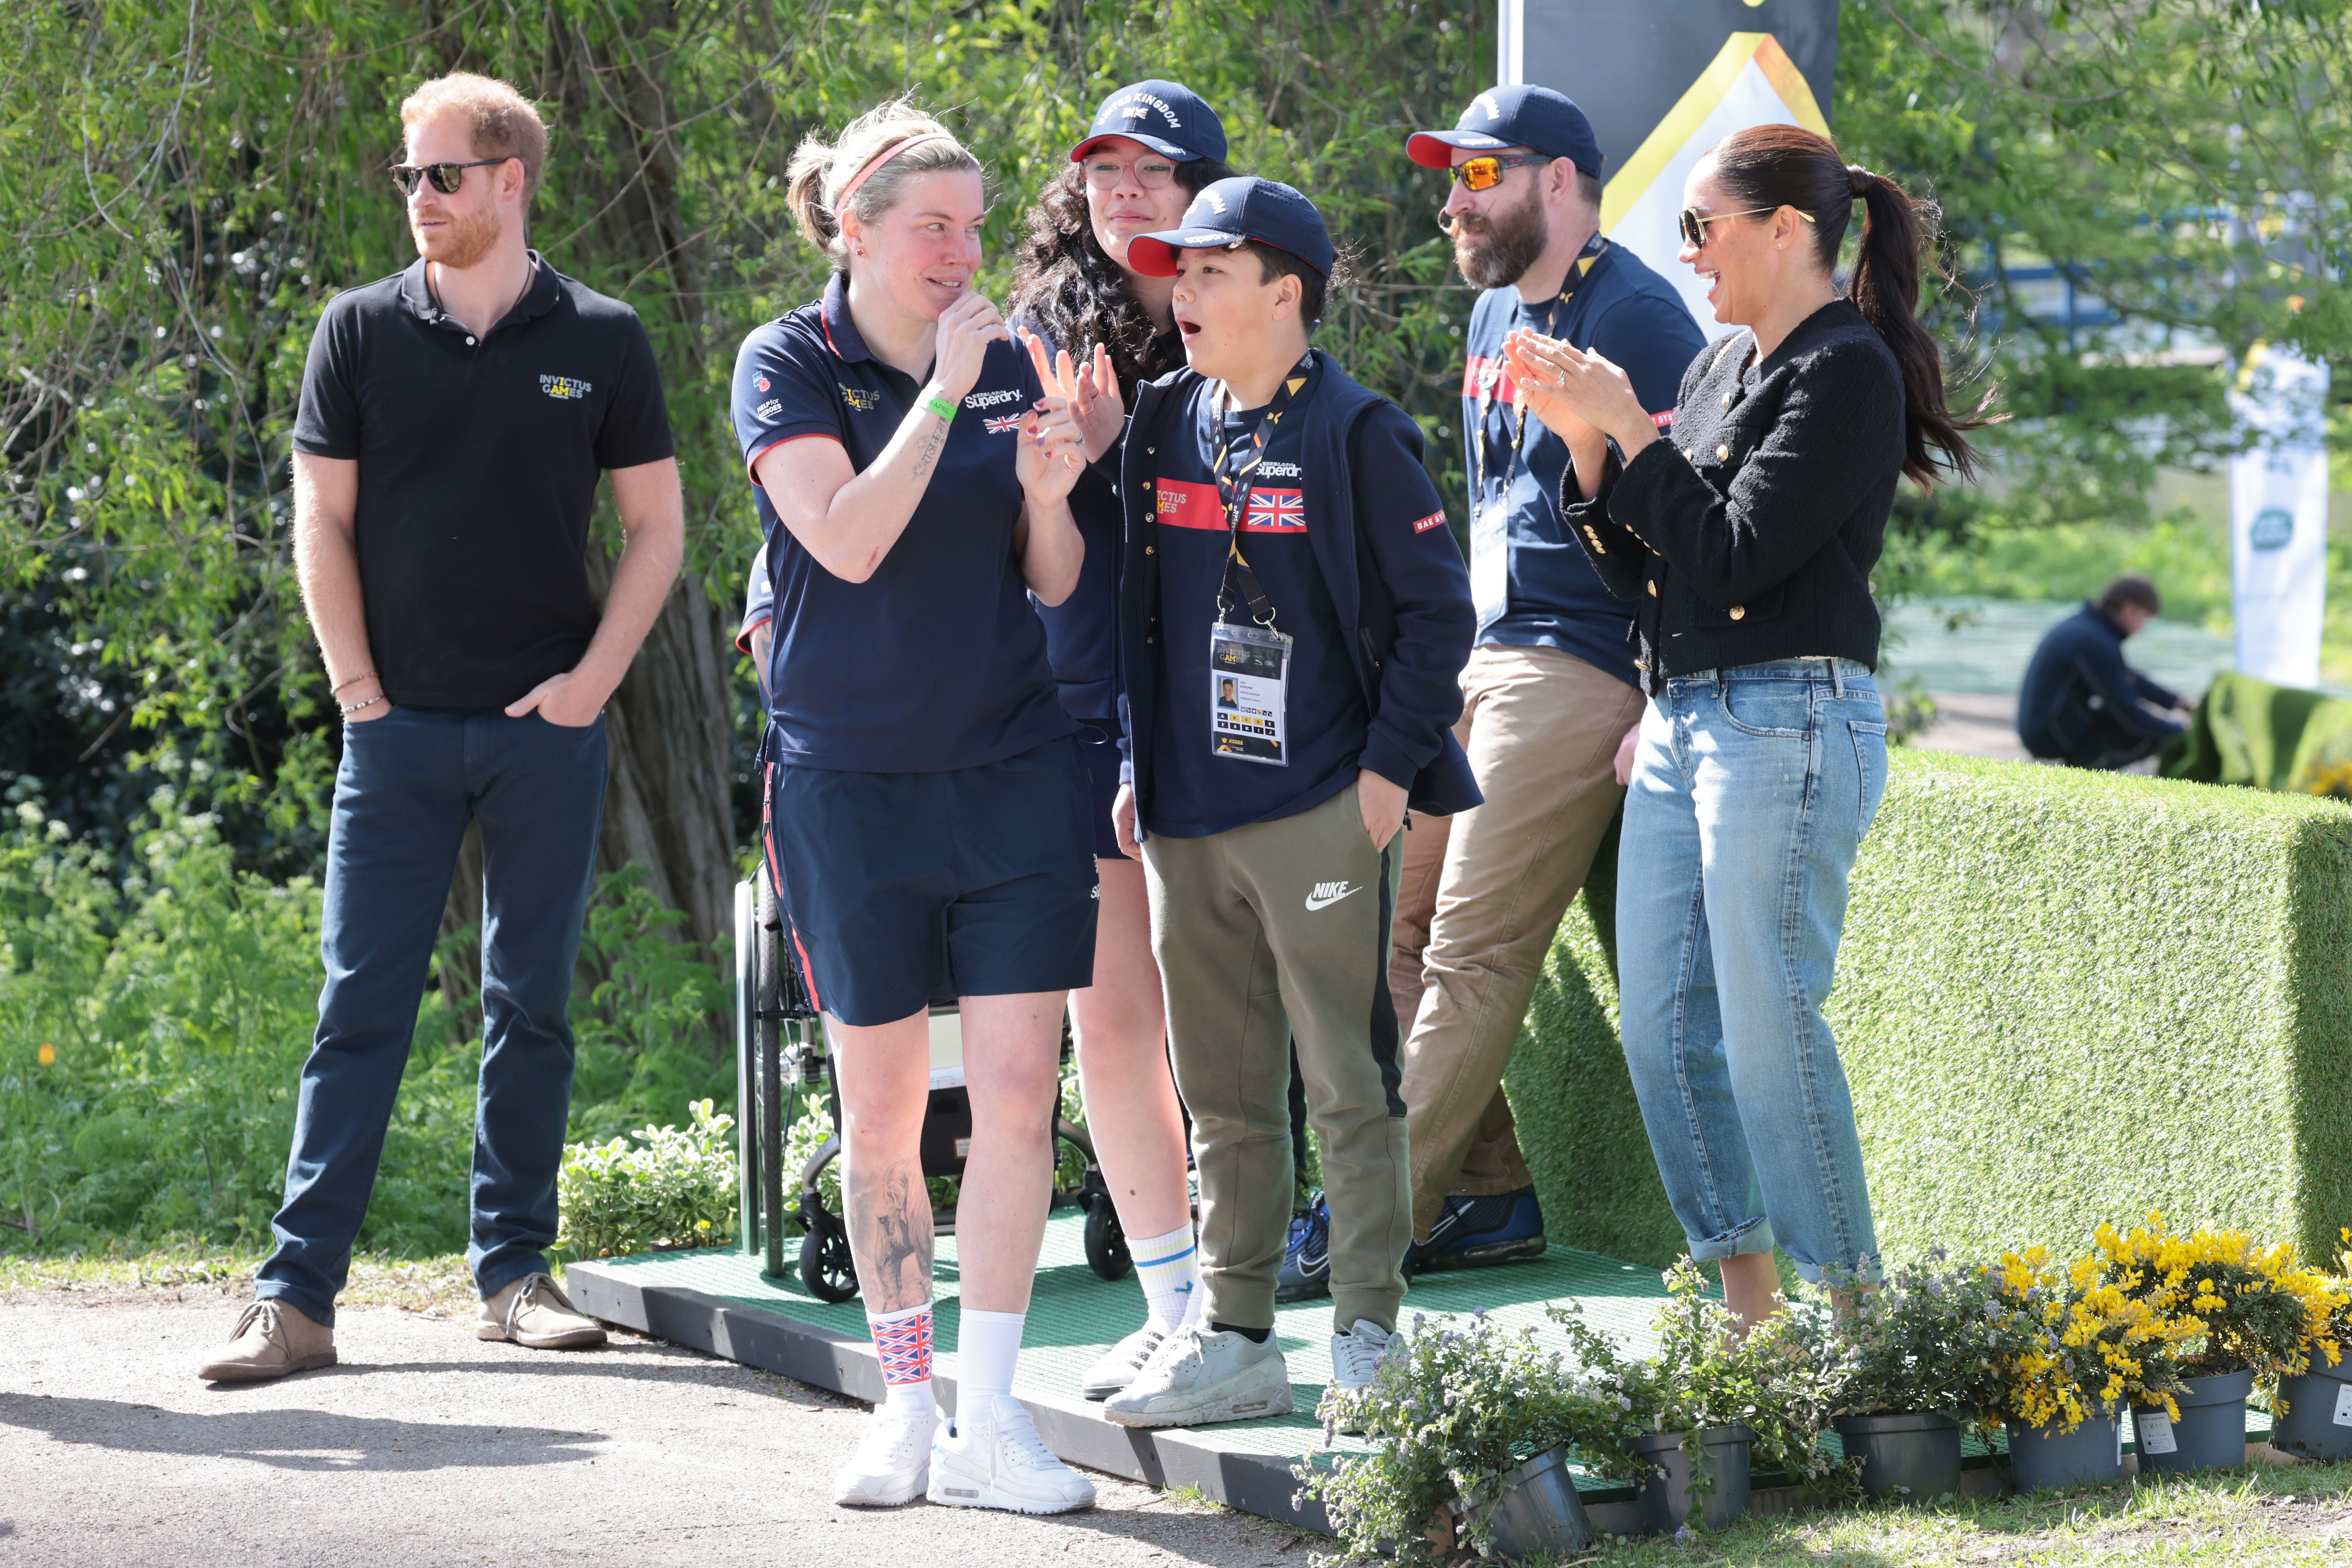  Prince Harry, Duke of Sussex and Meghan, Duchess of Sussex talk to members of Team United Kingdom during the Jaguar Land Rover Driving Challenge on day one of the Invictus Games The Hague 2020 at Zuiderpark on April 16, 2022 in The Hague, Netherlands. | Source: Getty Images